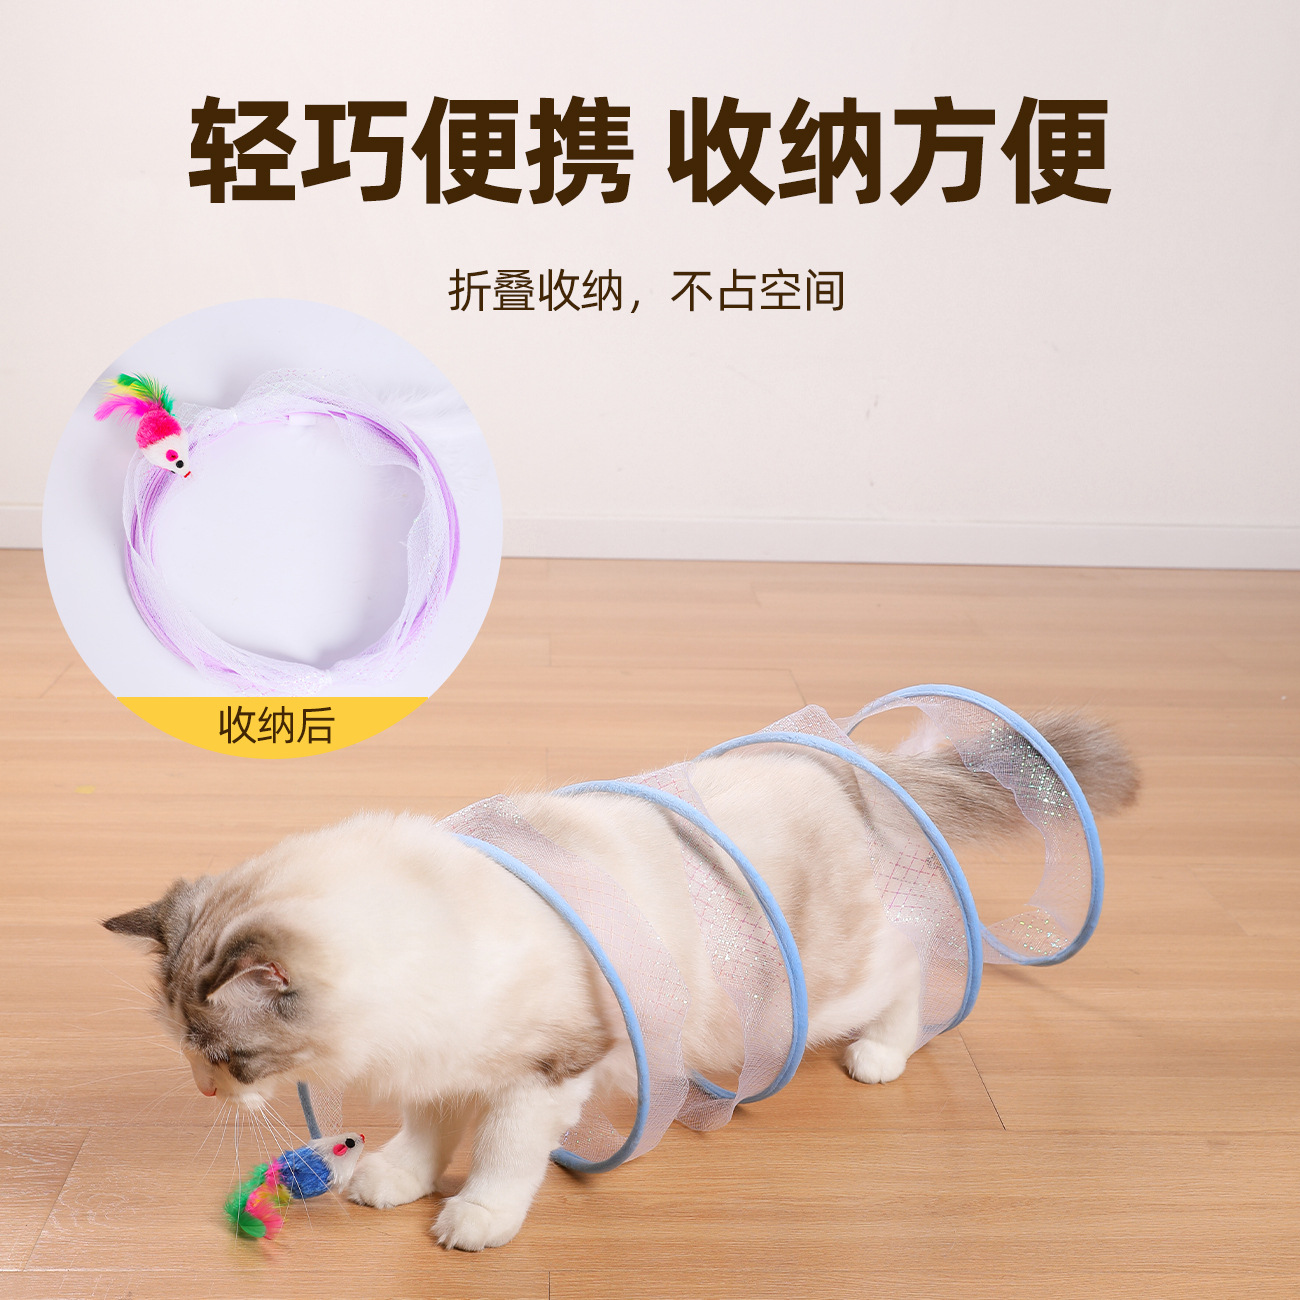 Cat Tunnel Cat Toy Self-Hi Relieving Stuffy Artifact Cat Tunnel Kitten Channel Kittens Pet Cat Pet Supplies